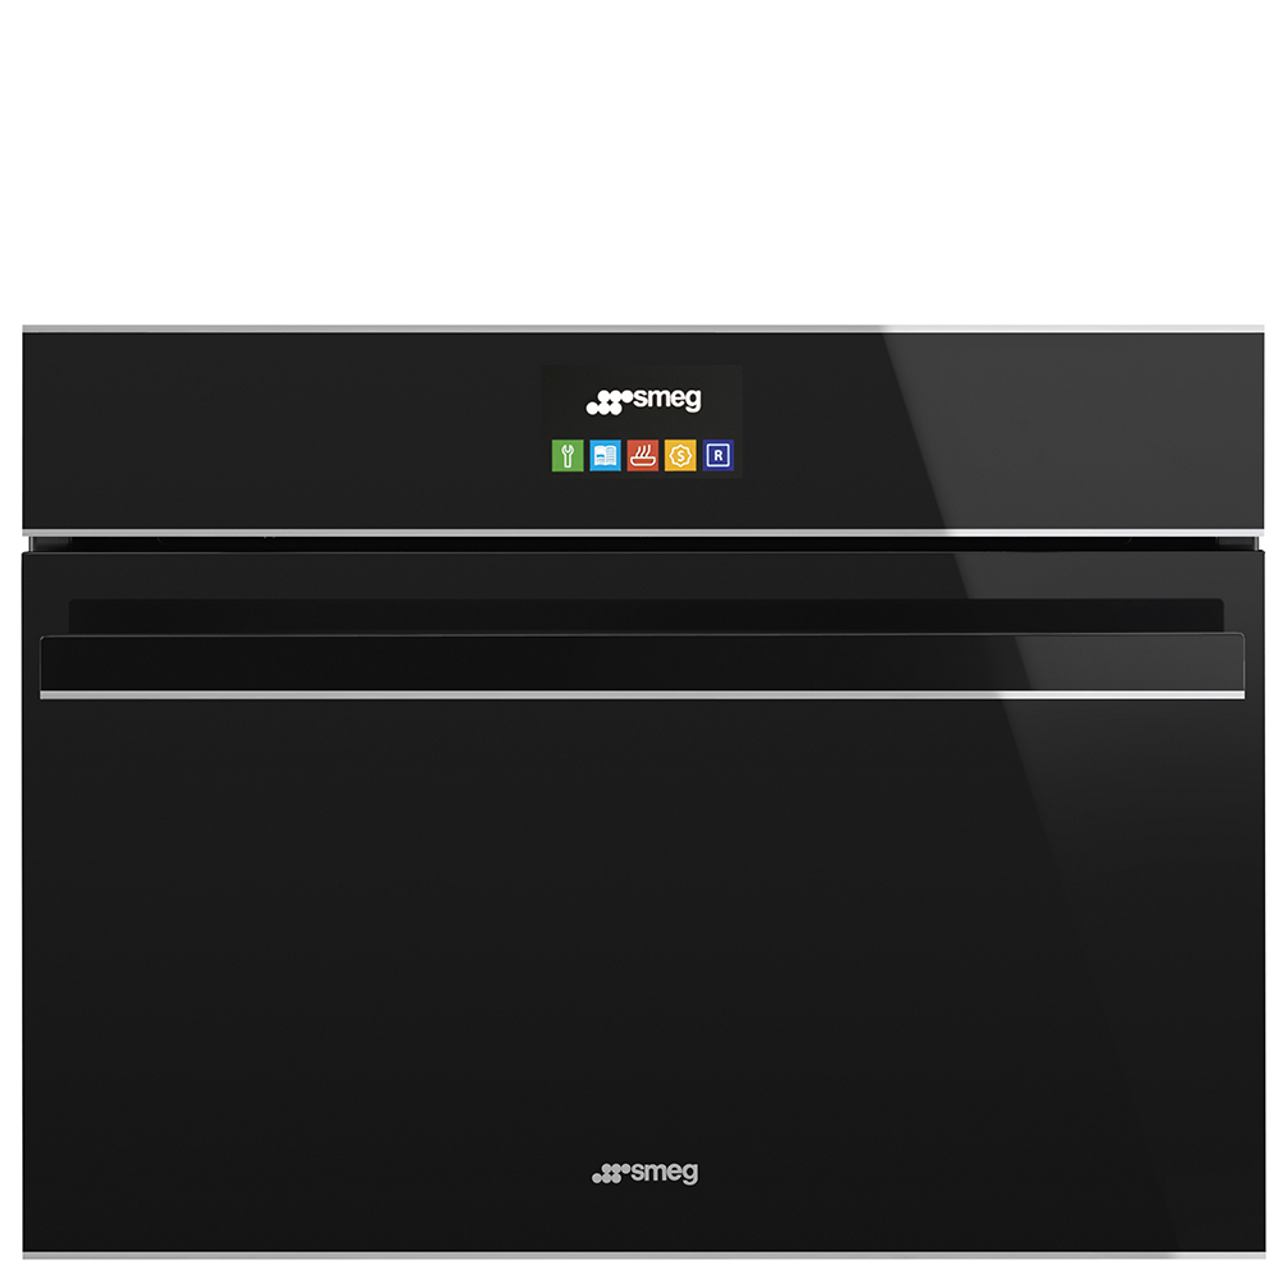 SFA4604VCNX - 45cm Dolce Stil Novo Compact Combi-Steam Oven - Black Glass Stainless Steel Trim